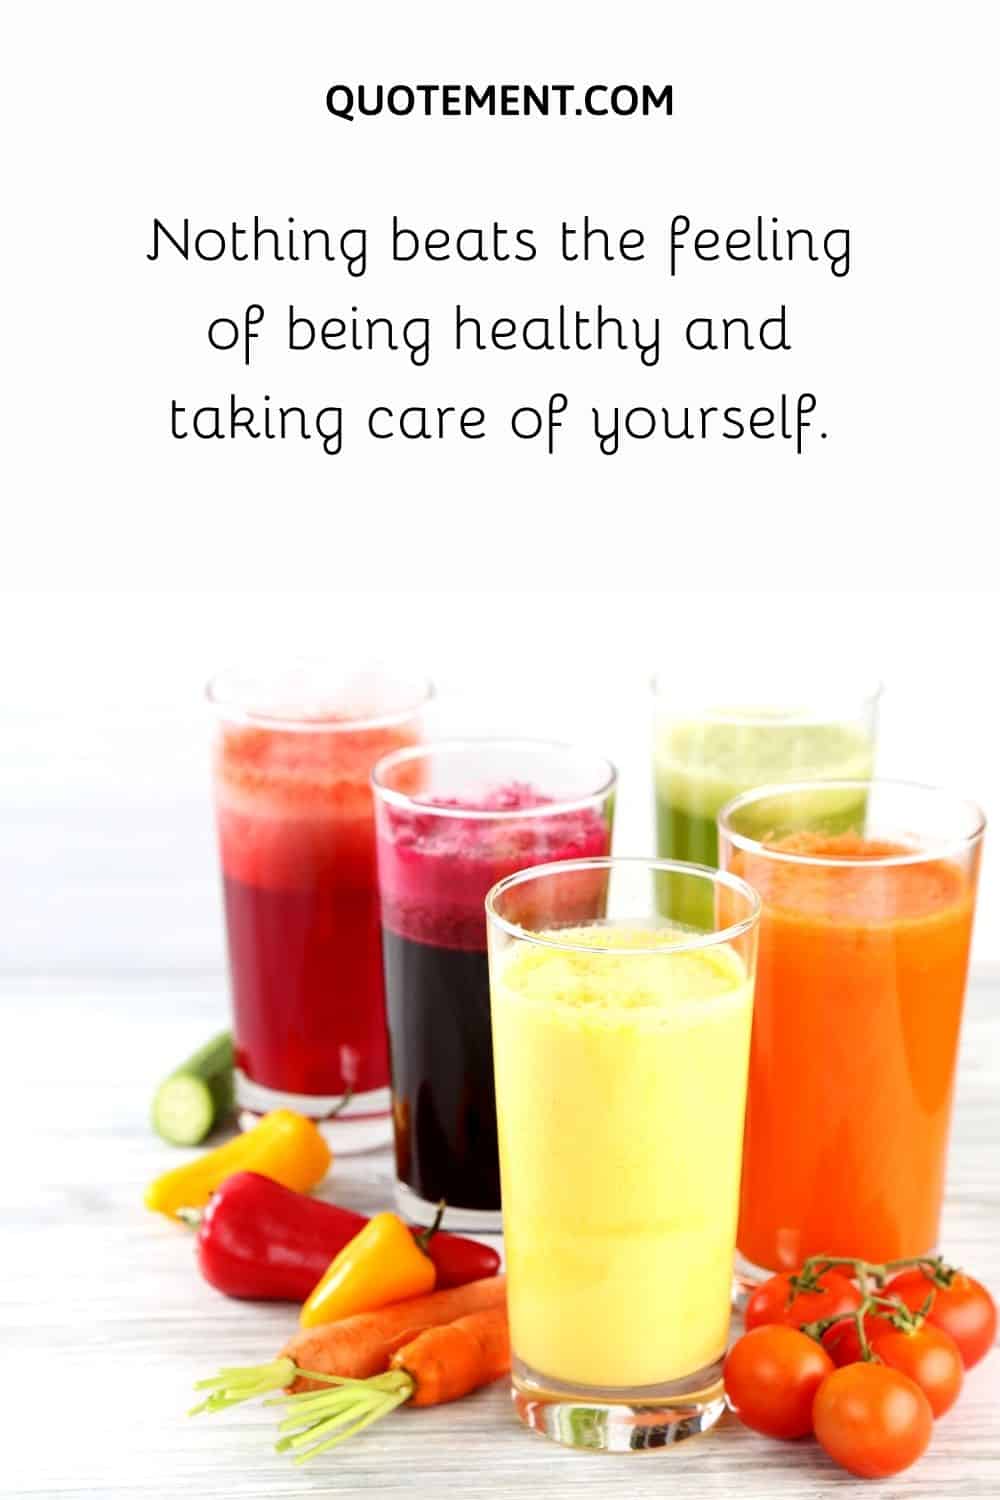 Nothing beats the feeling of being healthy and taking care of yourself